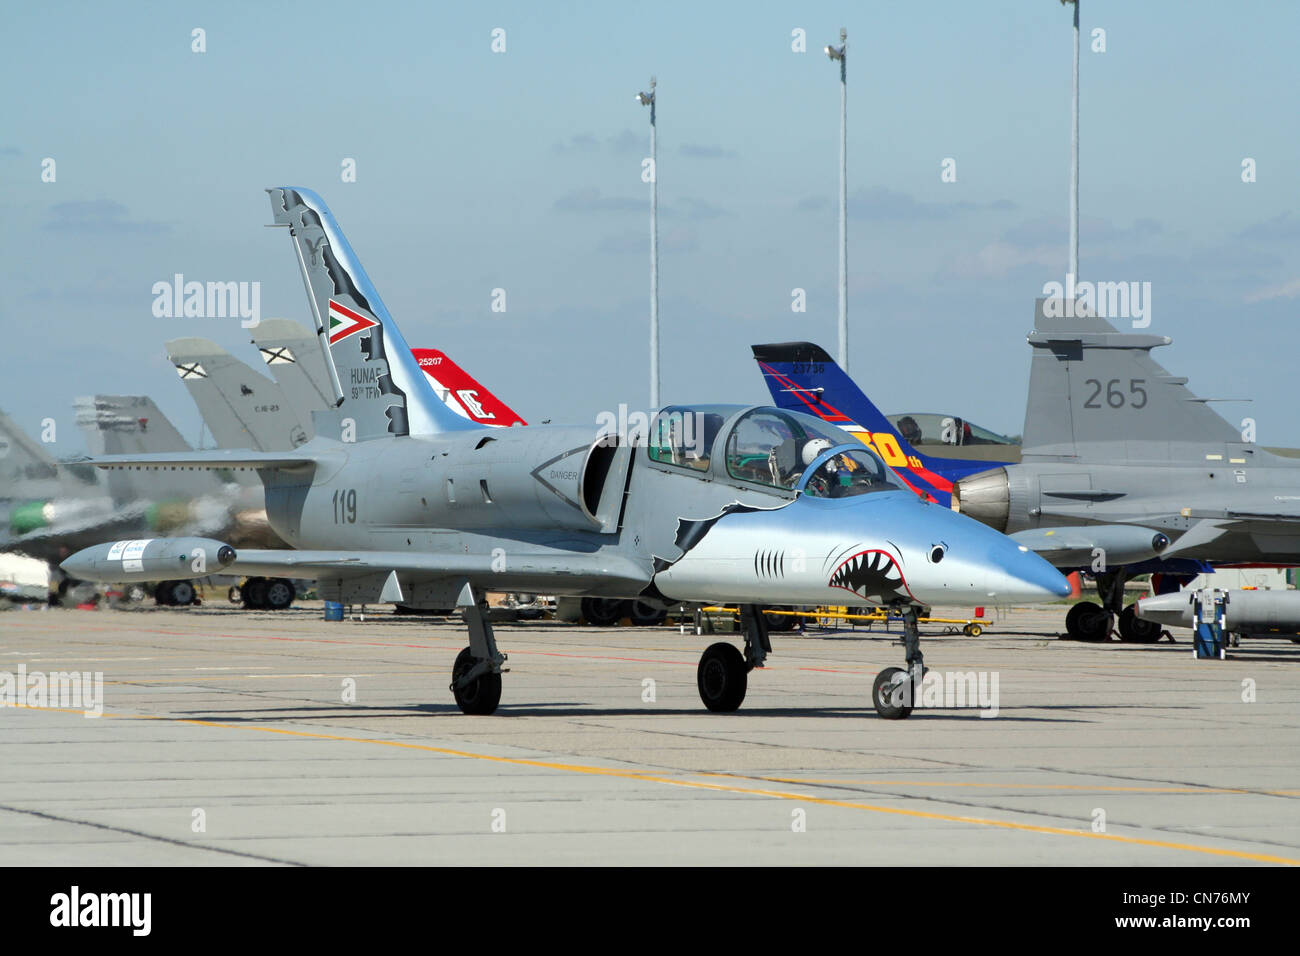 Hungarian Air Force L-39 trainer jet Stock Photo